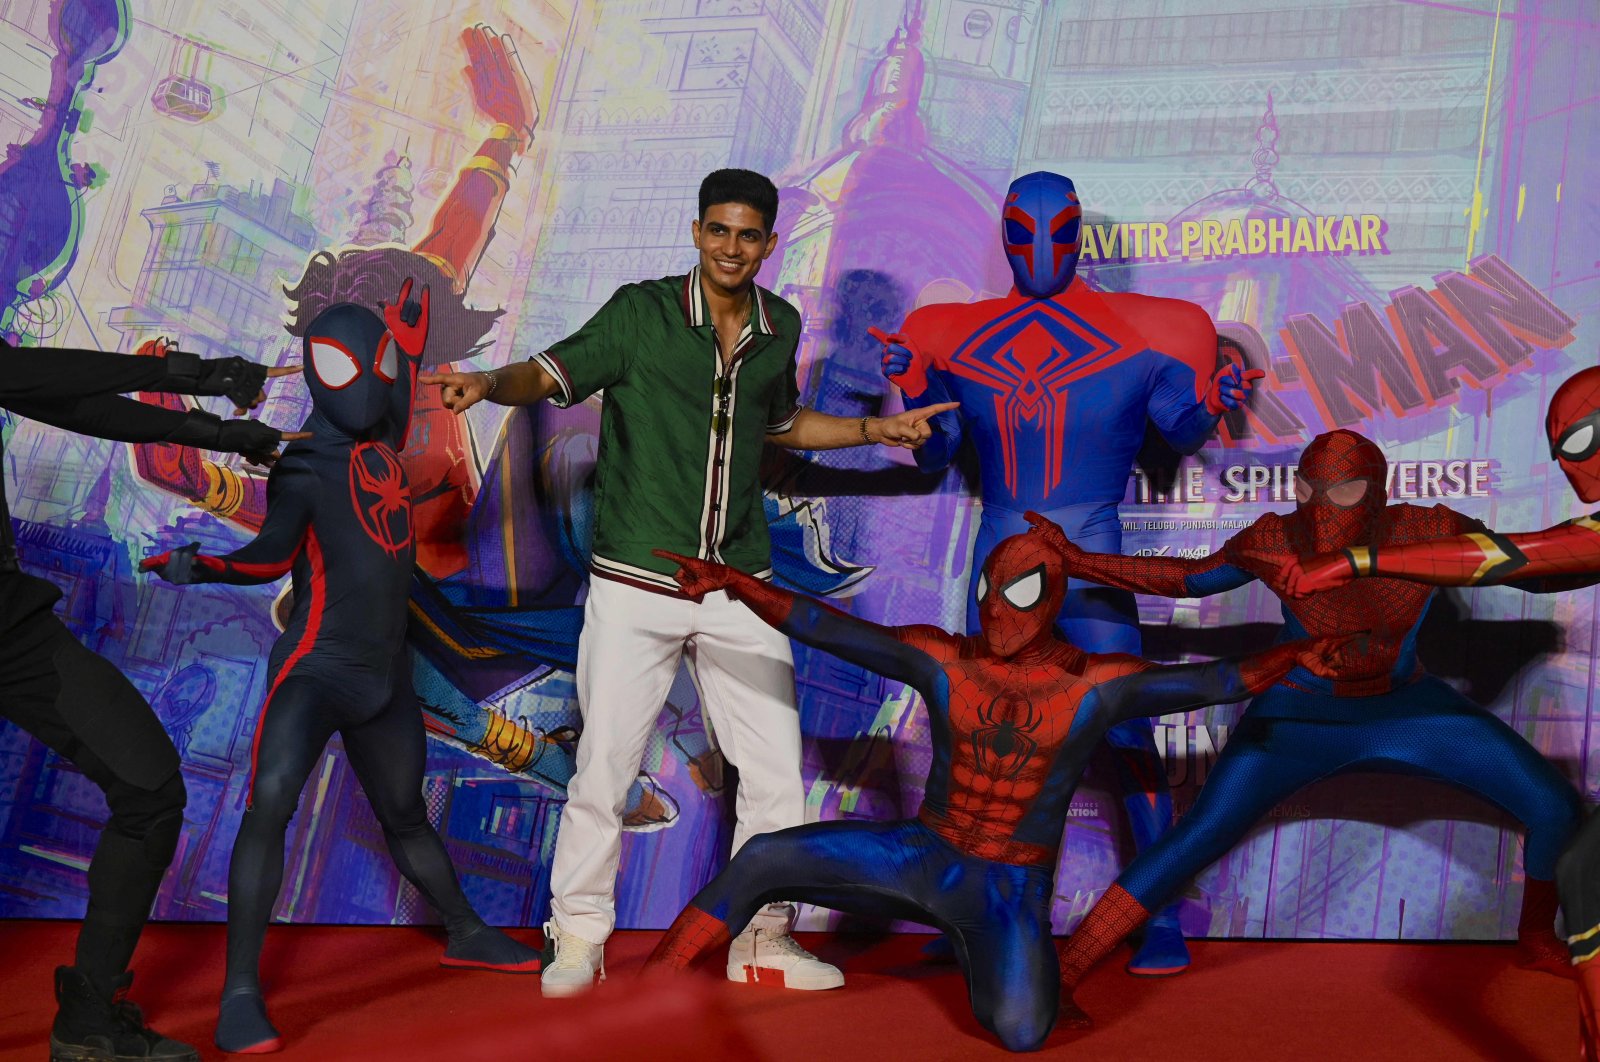 Indian Cricketer Shubman Gill poses for pictures during the trailer launch of the upcoming animated film &quot;Spider-Man: Across the Spider-Verse,&quot; for which he has done the voiceover in Hindi and Punjabi languages for the character of Spiderman, Mumbai, India, May 18, 2023. (AFP Photo)